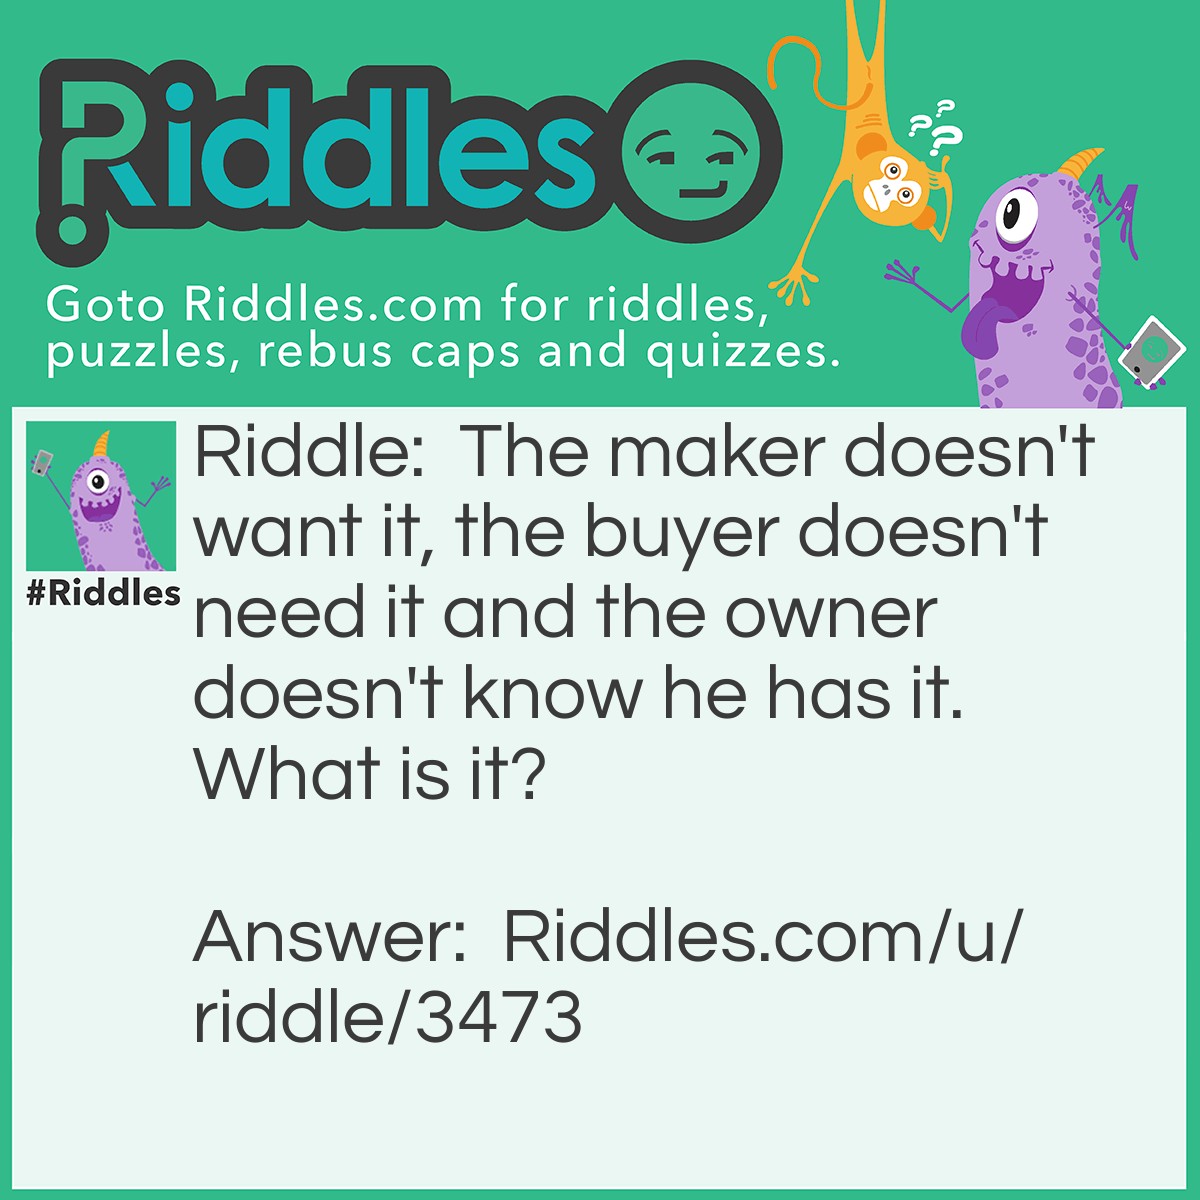 Riddle: The maker doesn't want it, the buyer doesn't need it and the owner doesn't know he has it. What is it? Answer: A coffin.